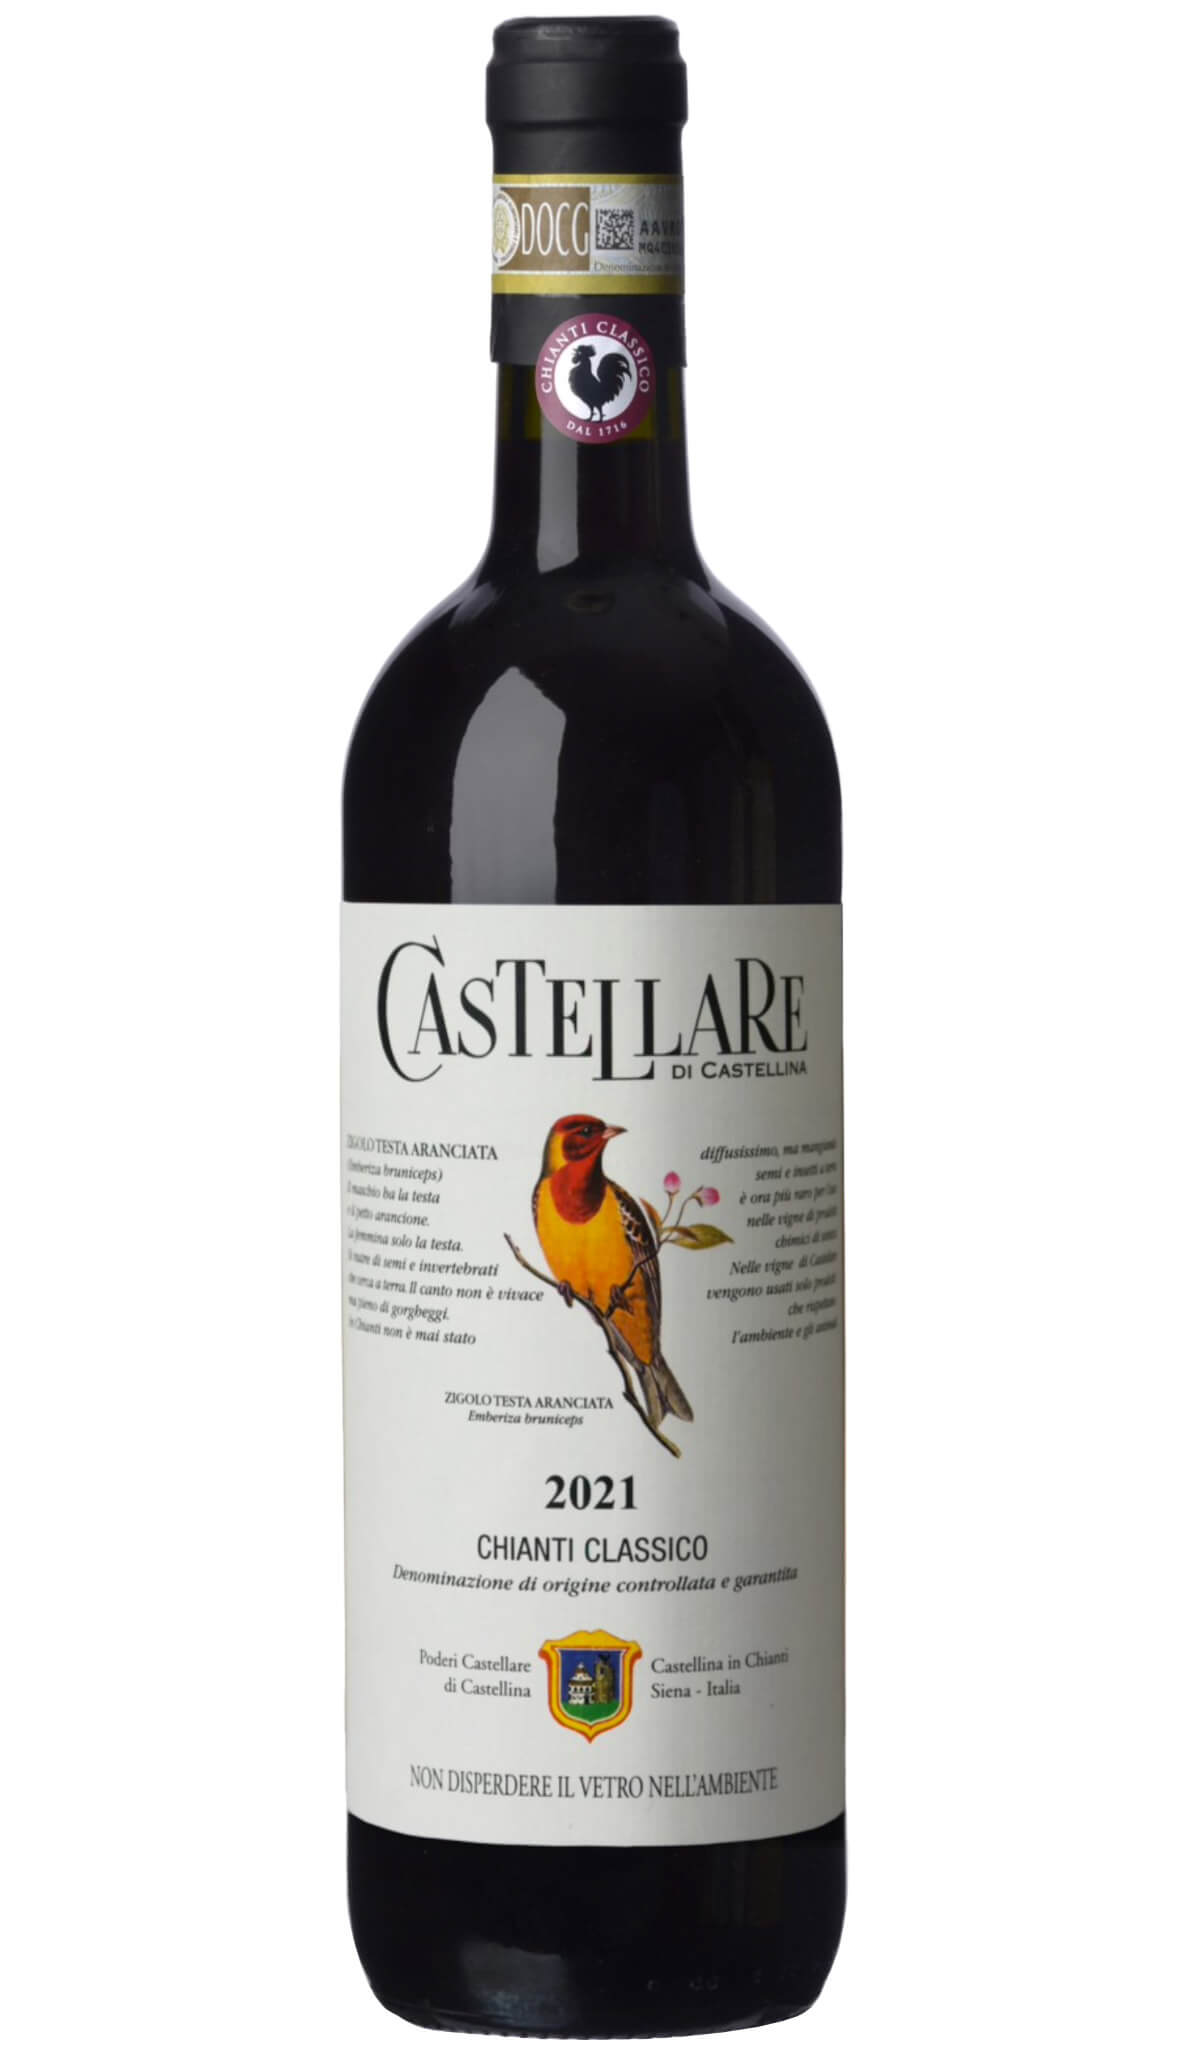 Find out more or buy Castellare Di Castellina Chianti Classico 2021 (Italy) online at Wine Sellers Direct - Australia’s independent liquor specialists.